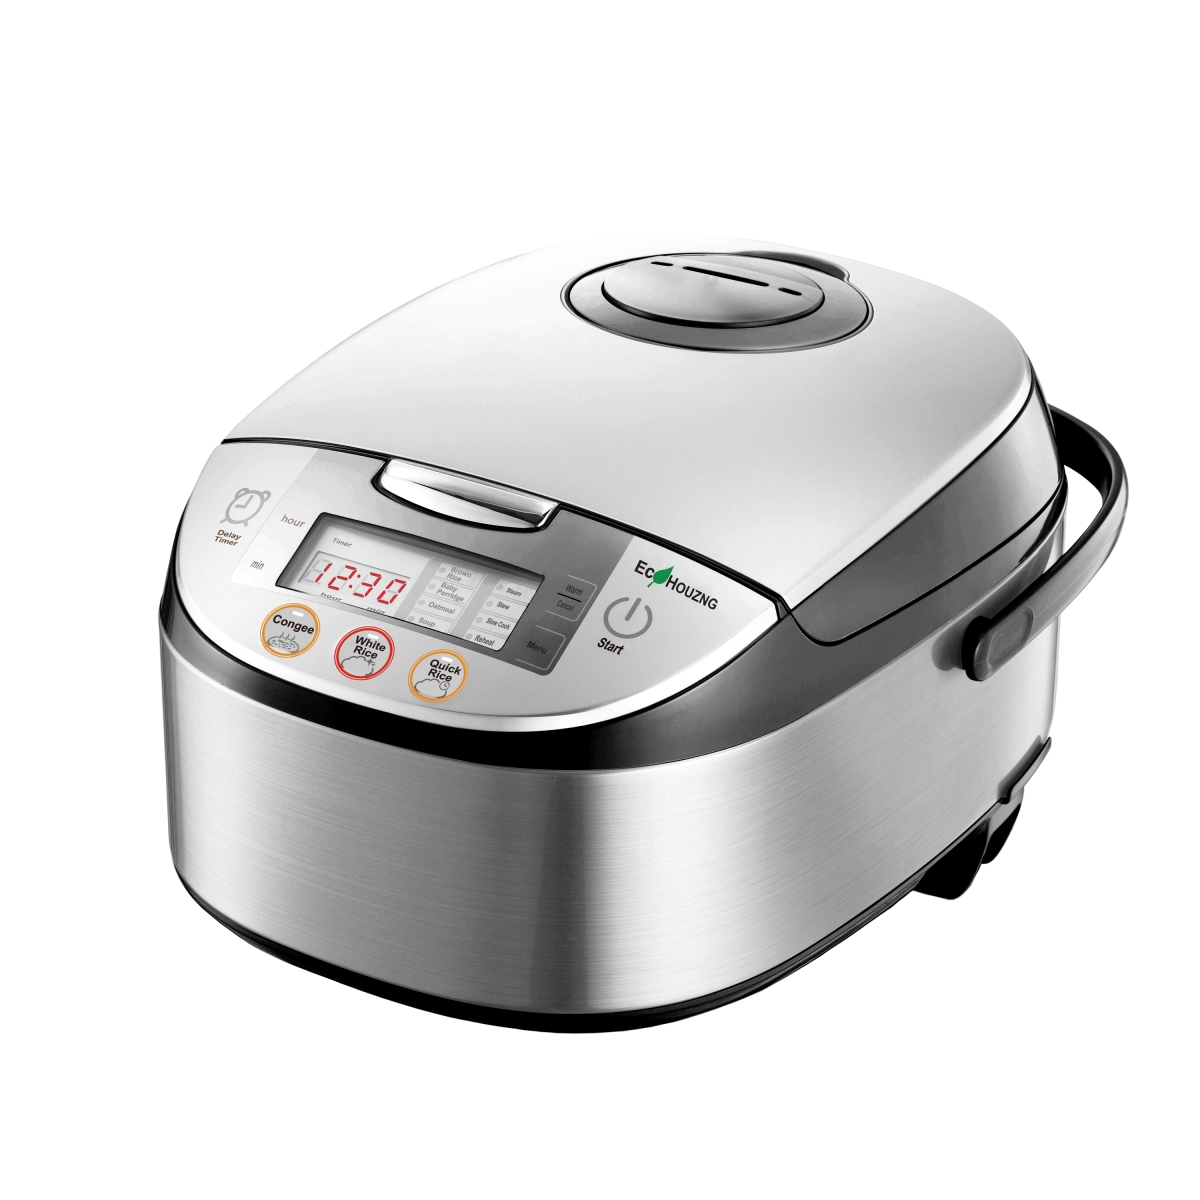 Picture of Ecohouzng ECP5015 High Tech Multi-function Rice Cooker